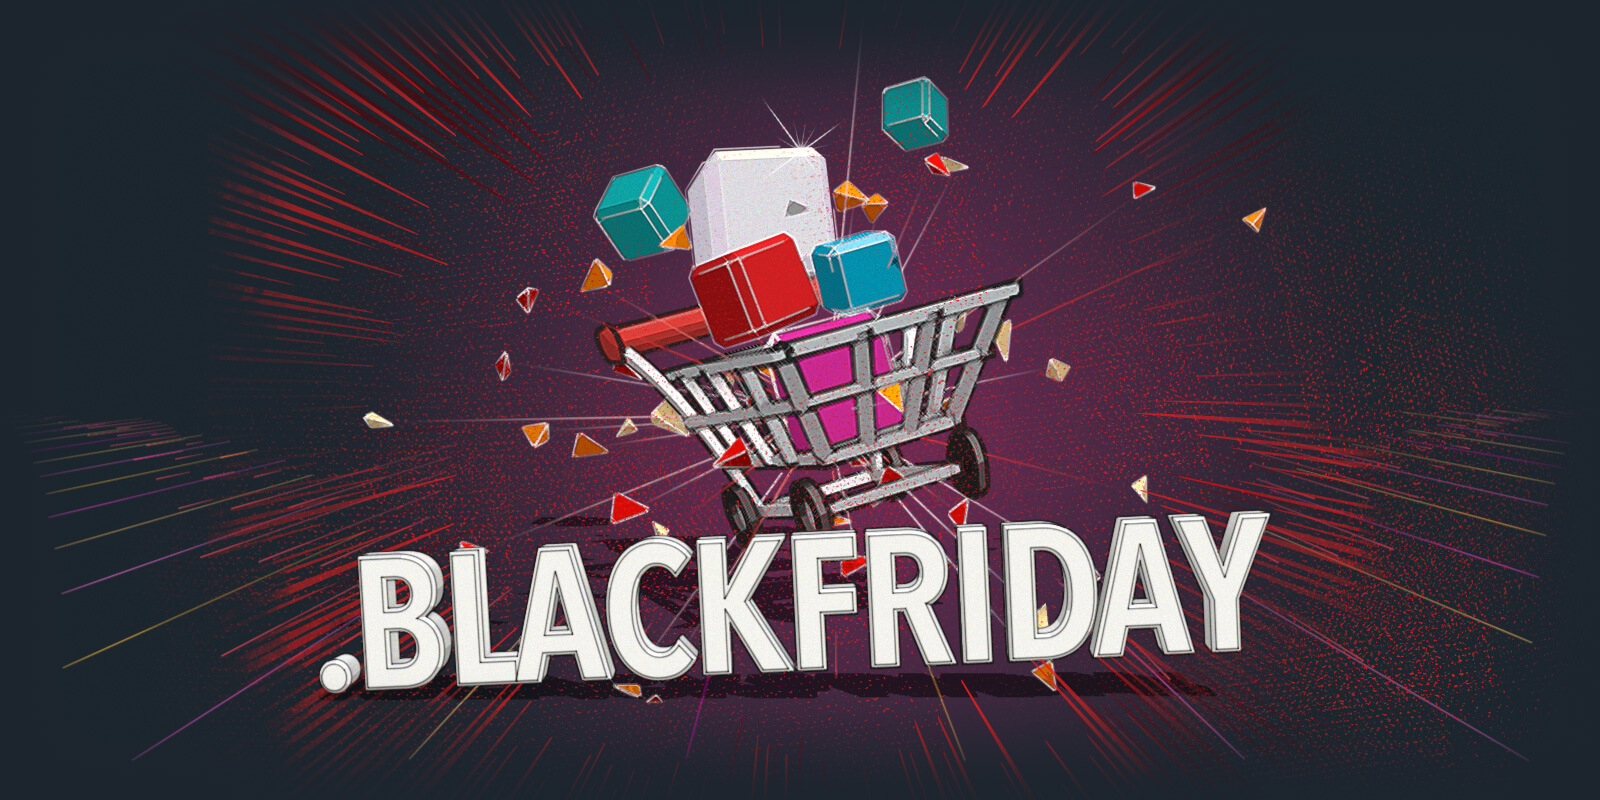 Get ready for .blackfriday now!